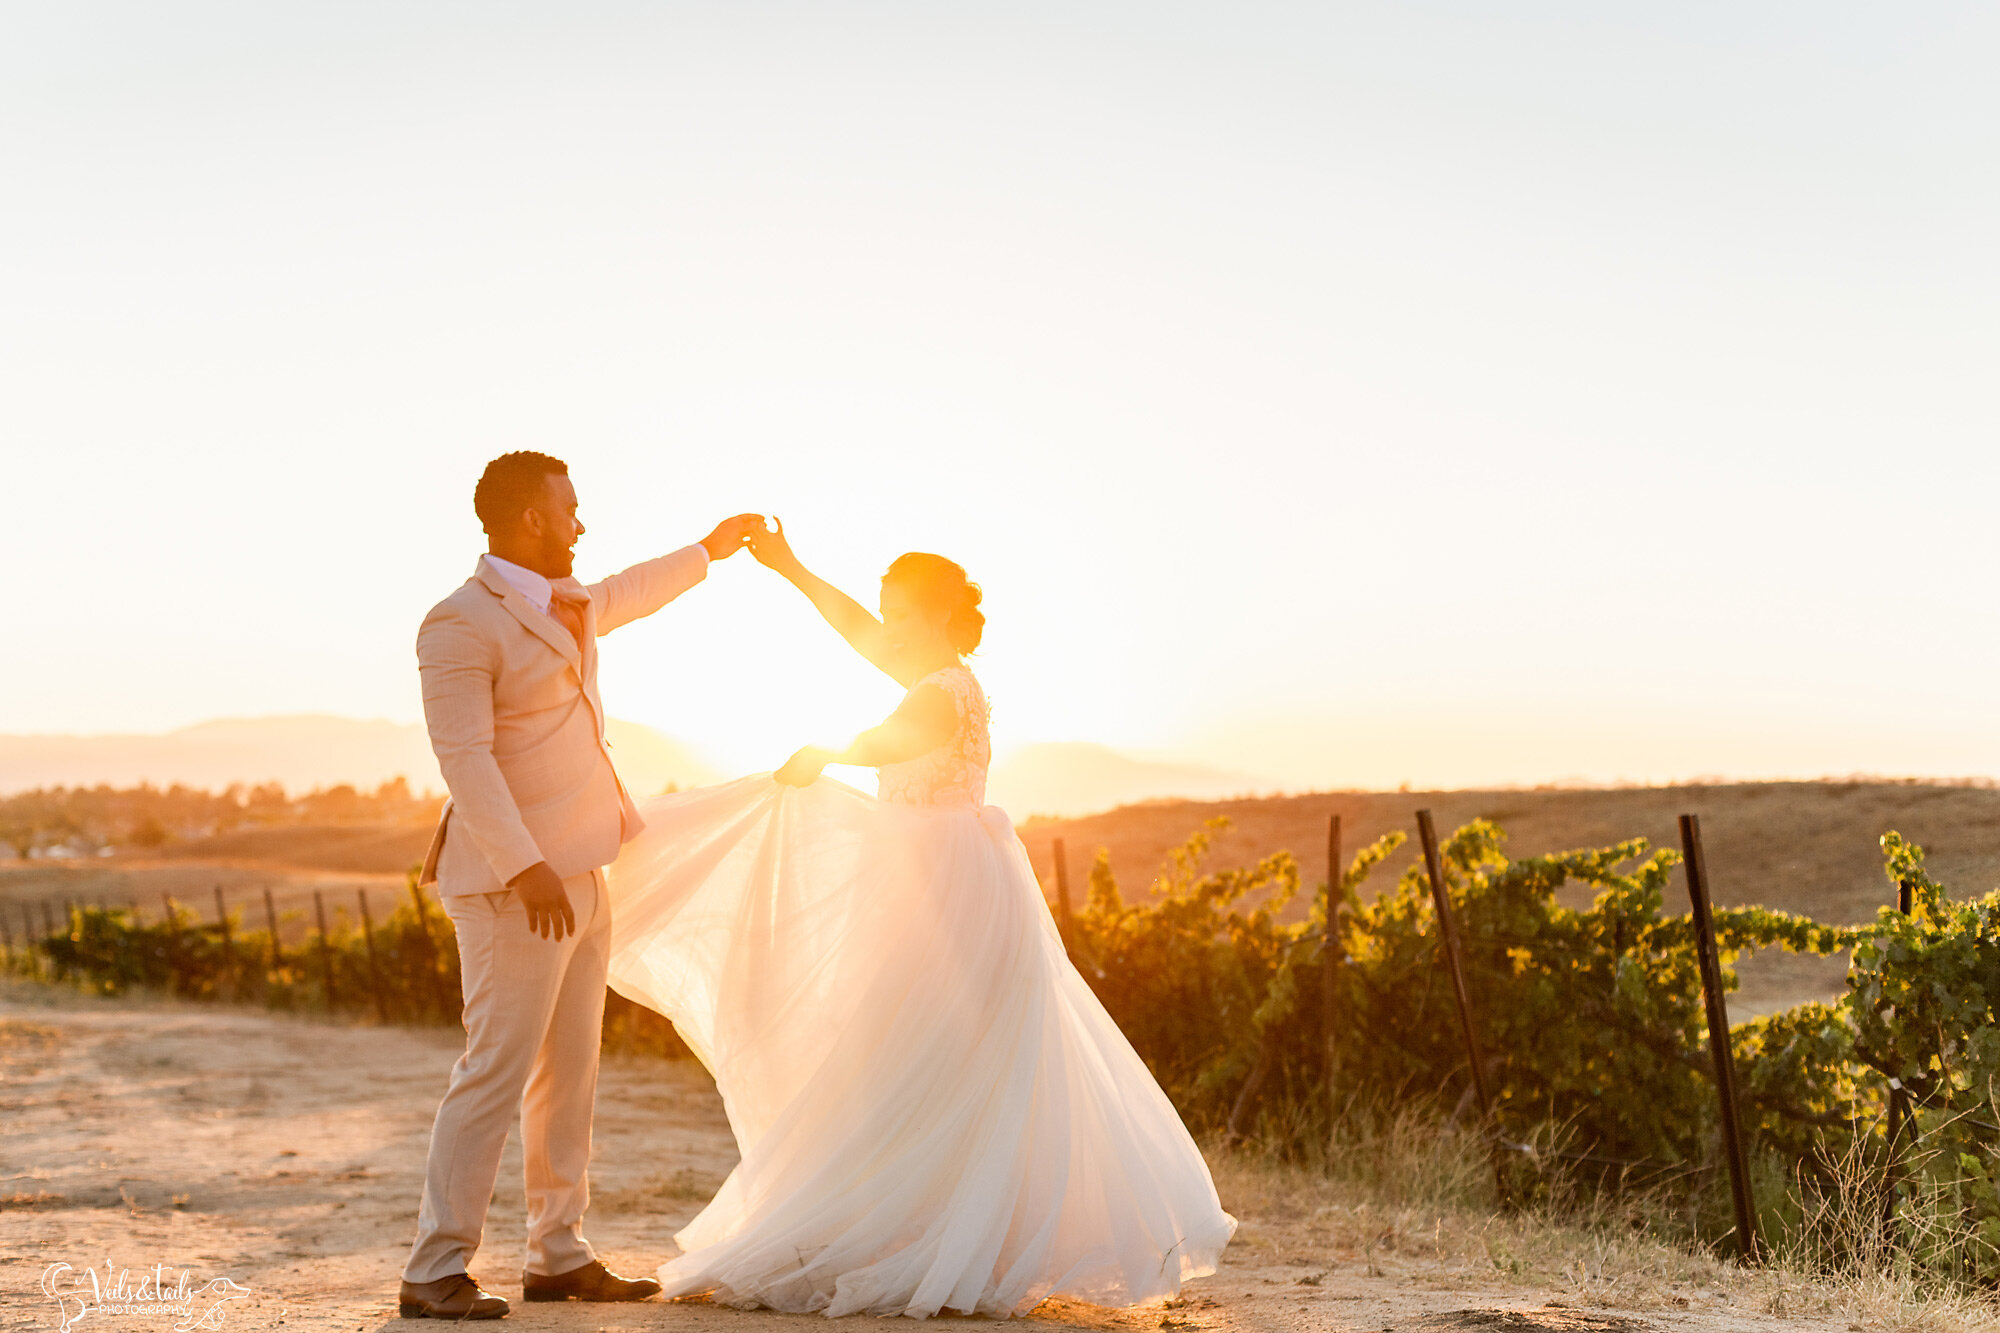 dancing in the sunset, intimate wedding photography, small wedding, southern california photographer